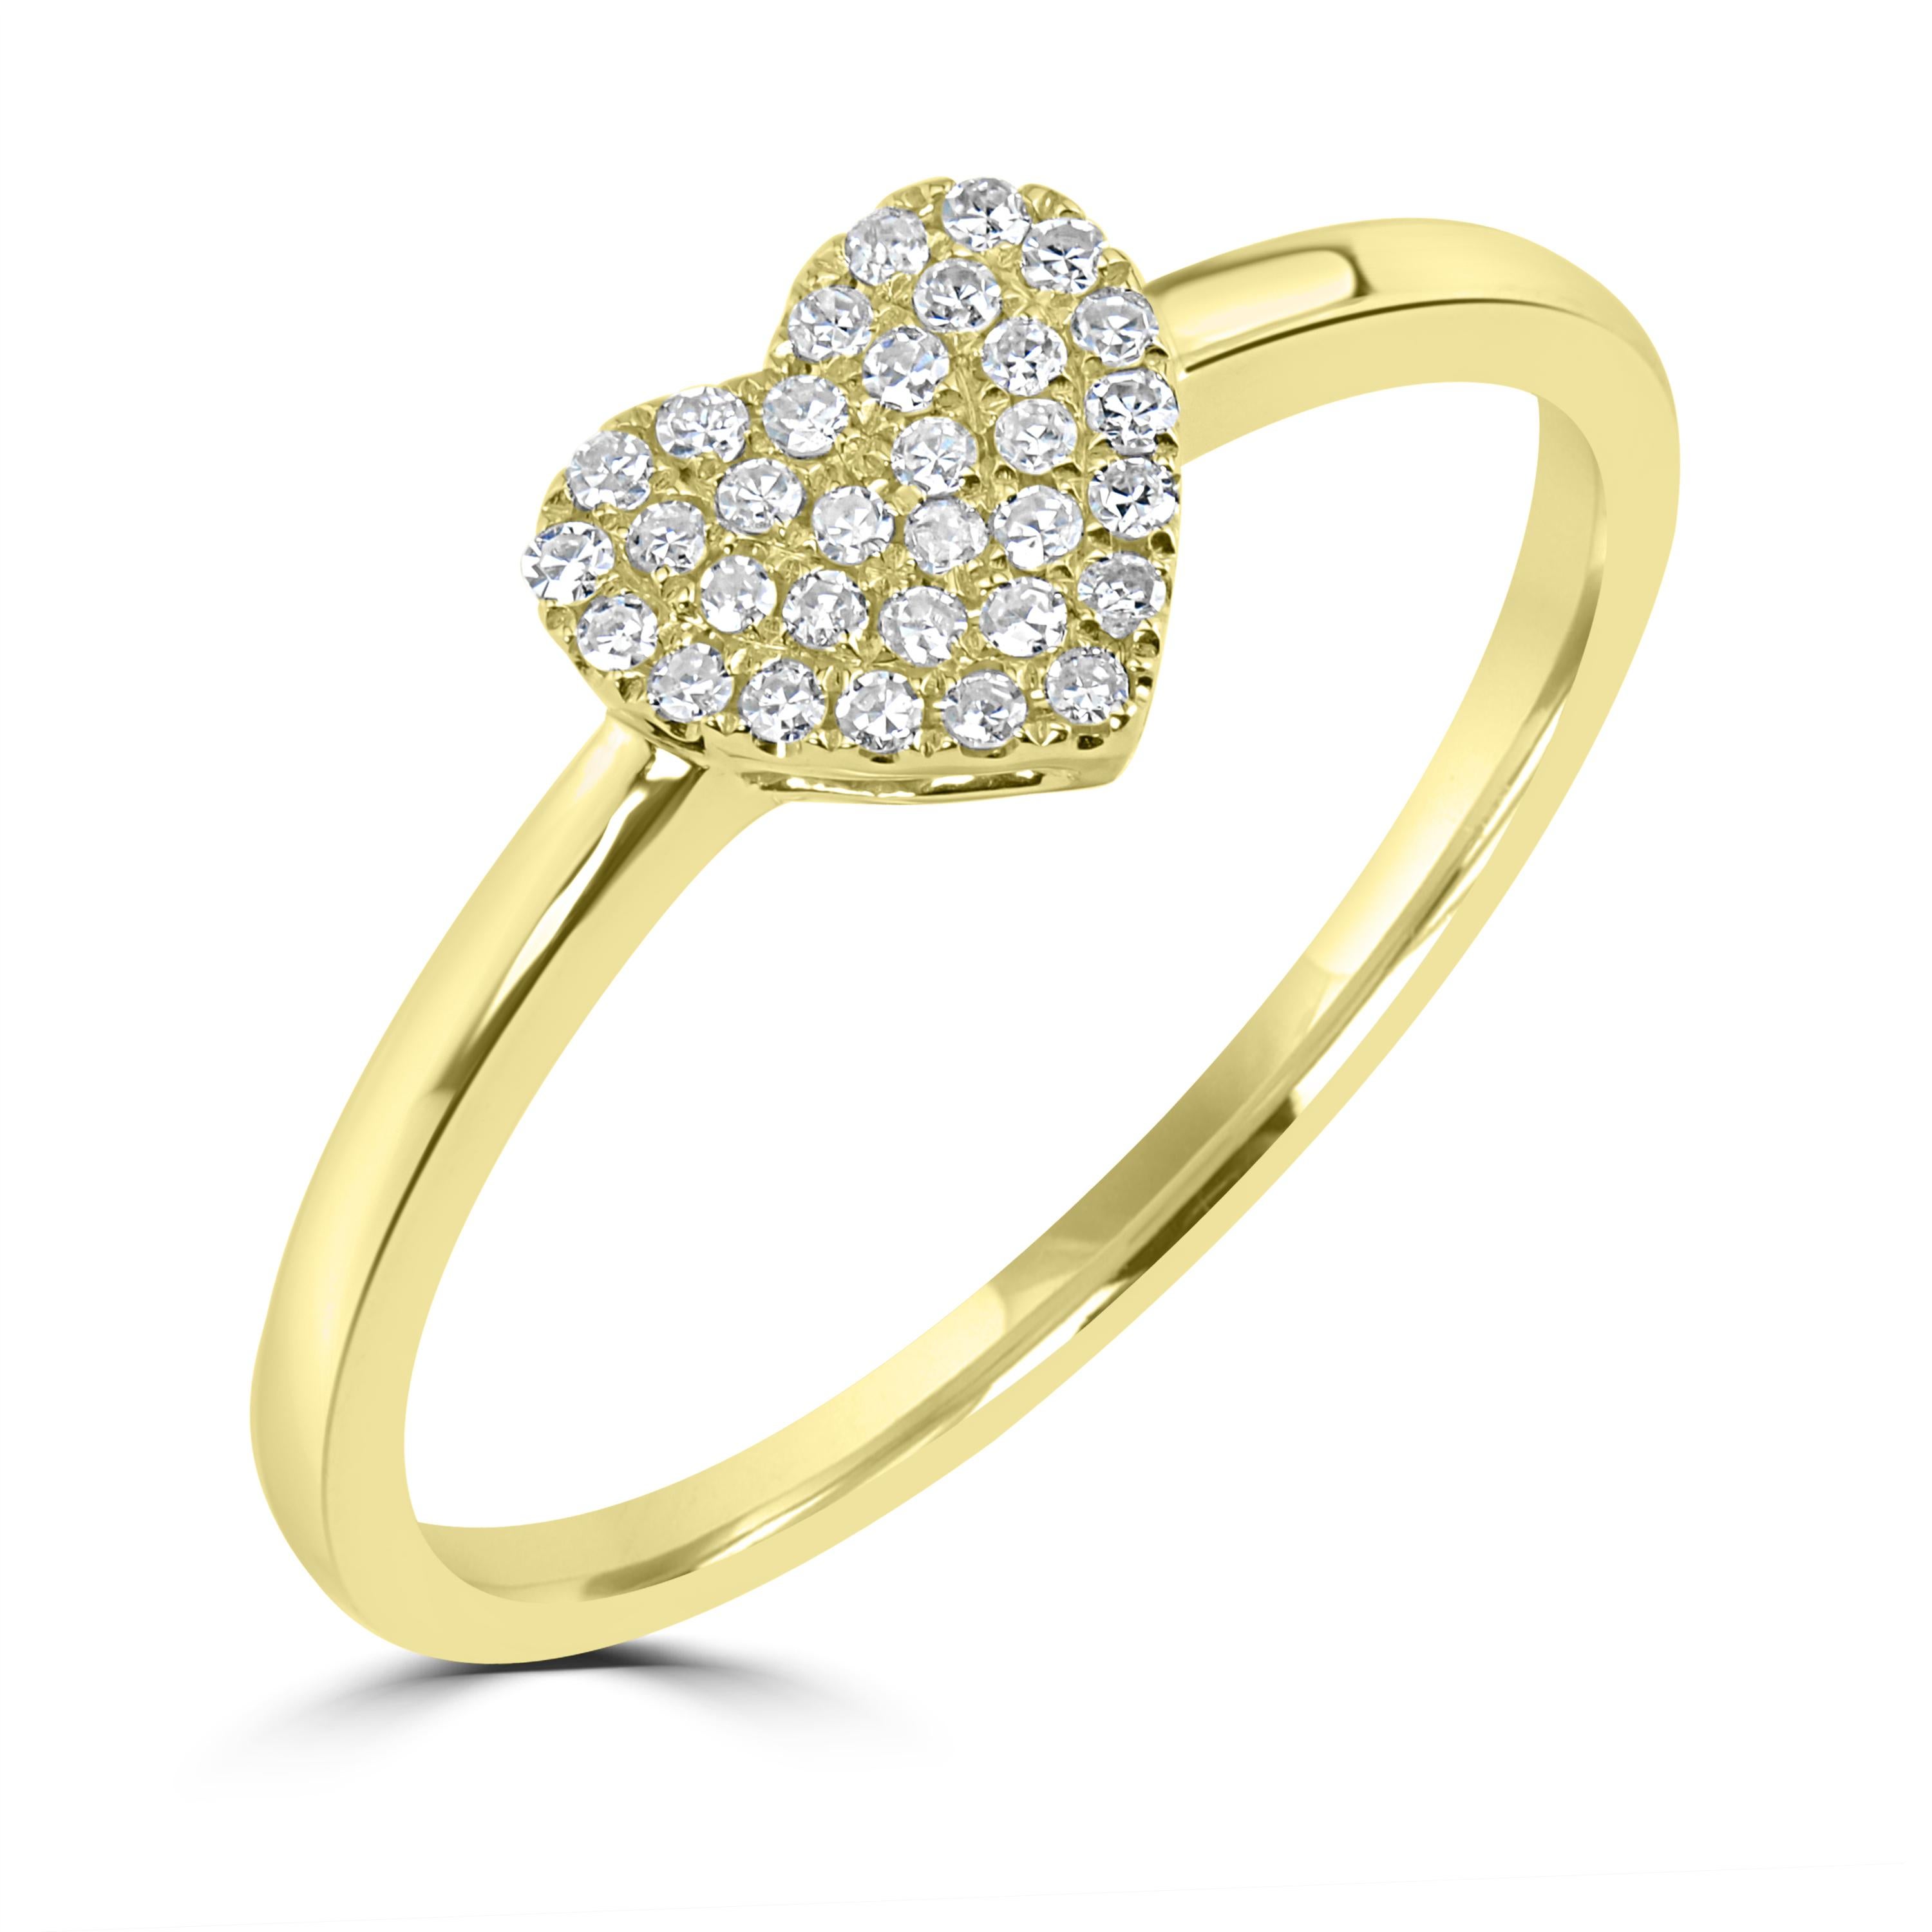 This adorable Luxle heart ring in 18K yellow gold is adorned with round cut diamonds. Each ring is made with 32 round diamonds set in pave.
Please follow the Luxury Jewels storefront to view the latest collections & exclusive one of a kind pieces.